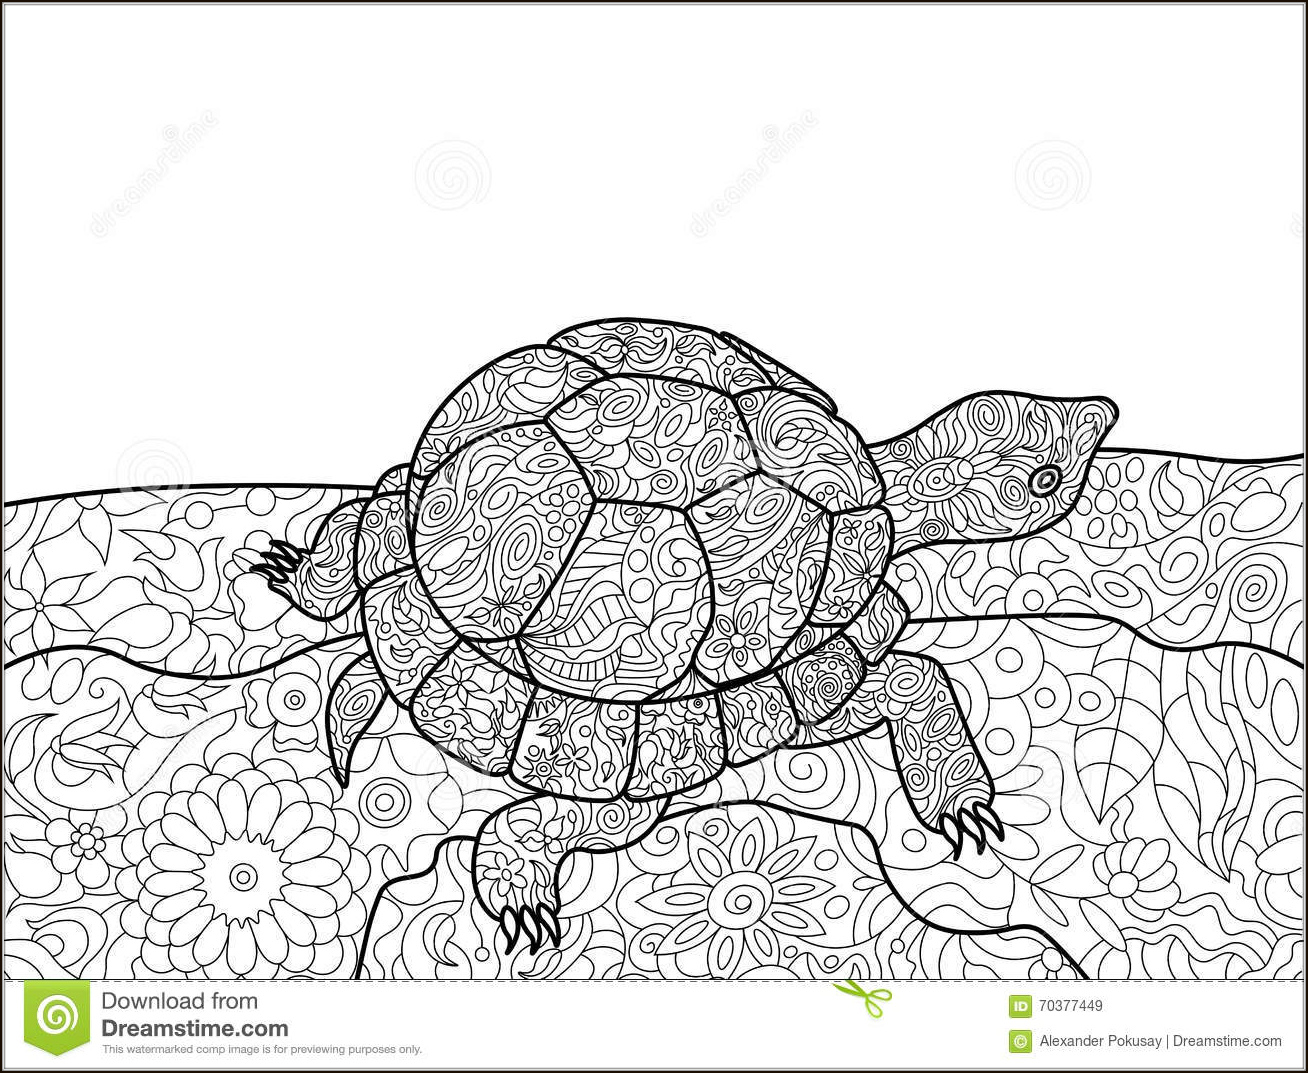 Coloring for adults, Coloring Antistress, тварини, travel, sophisticated coloring antistress,  животные, turtle,animals